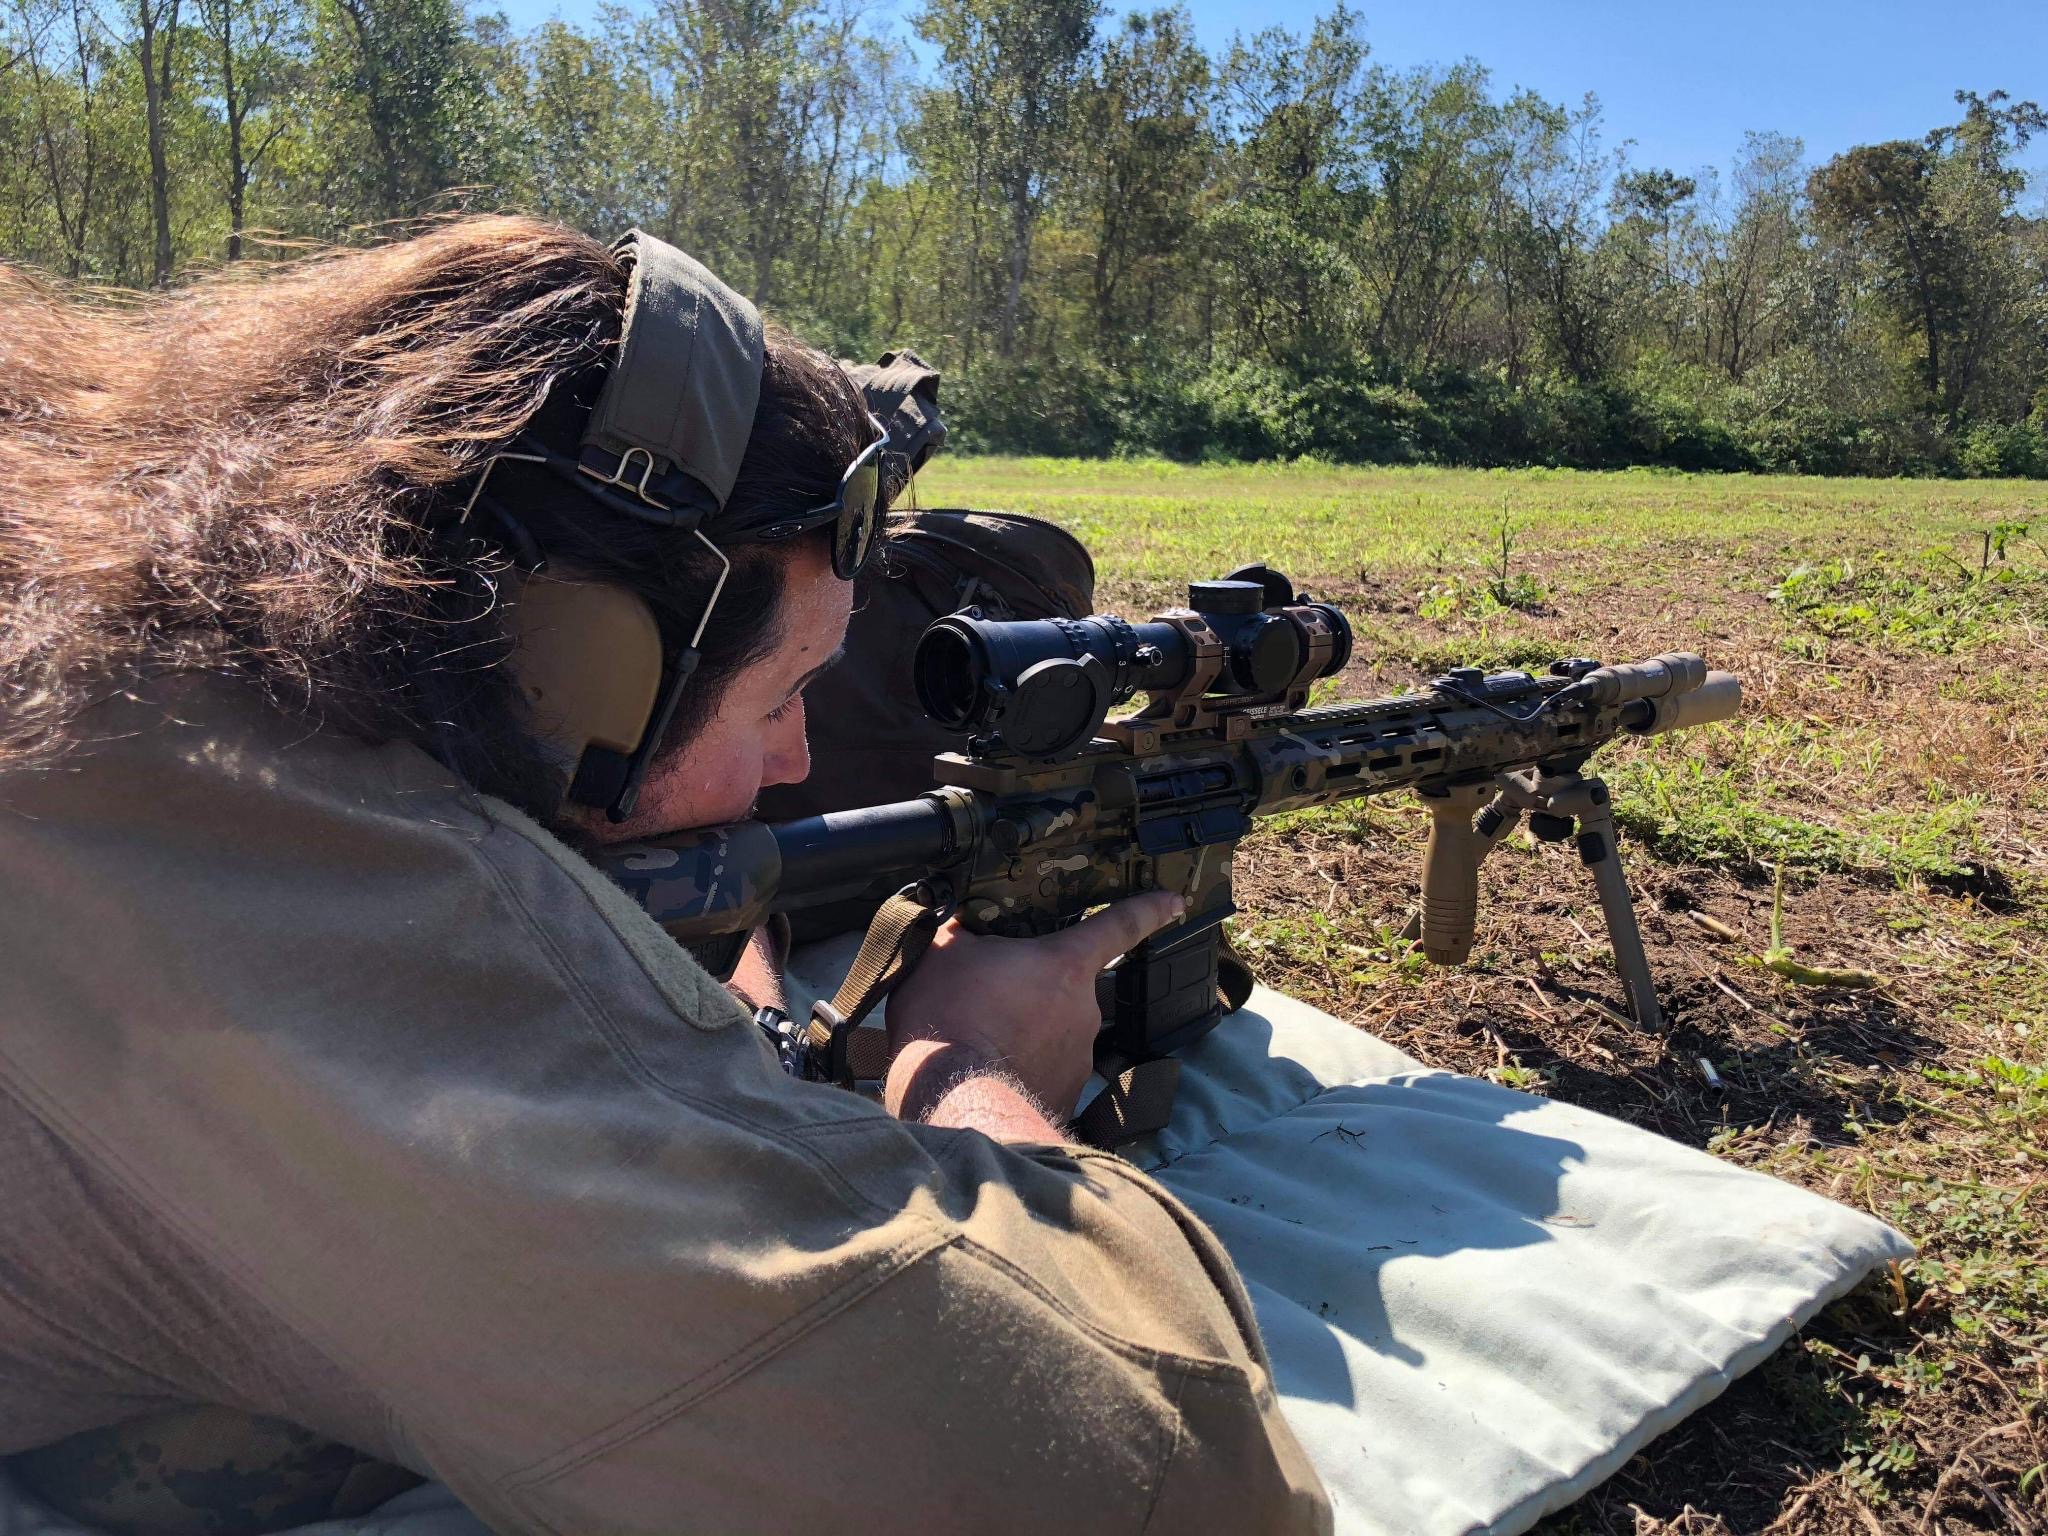 SPR special purpose rifle at Kyle Defoor scoped rifle class